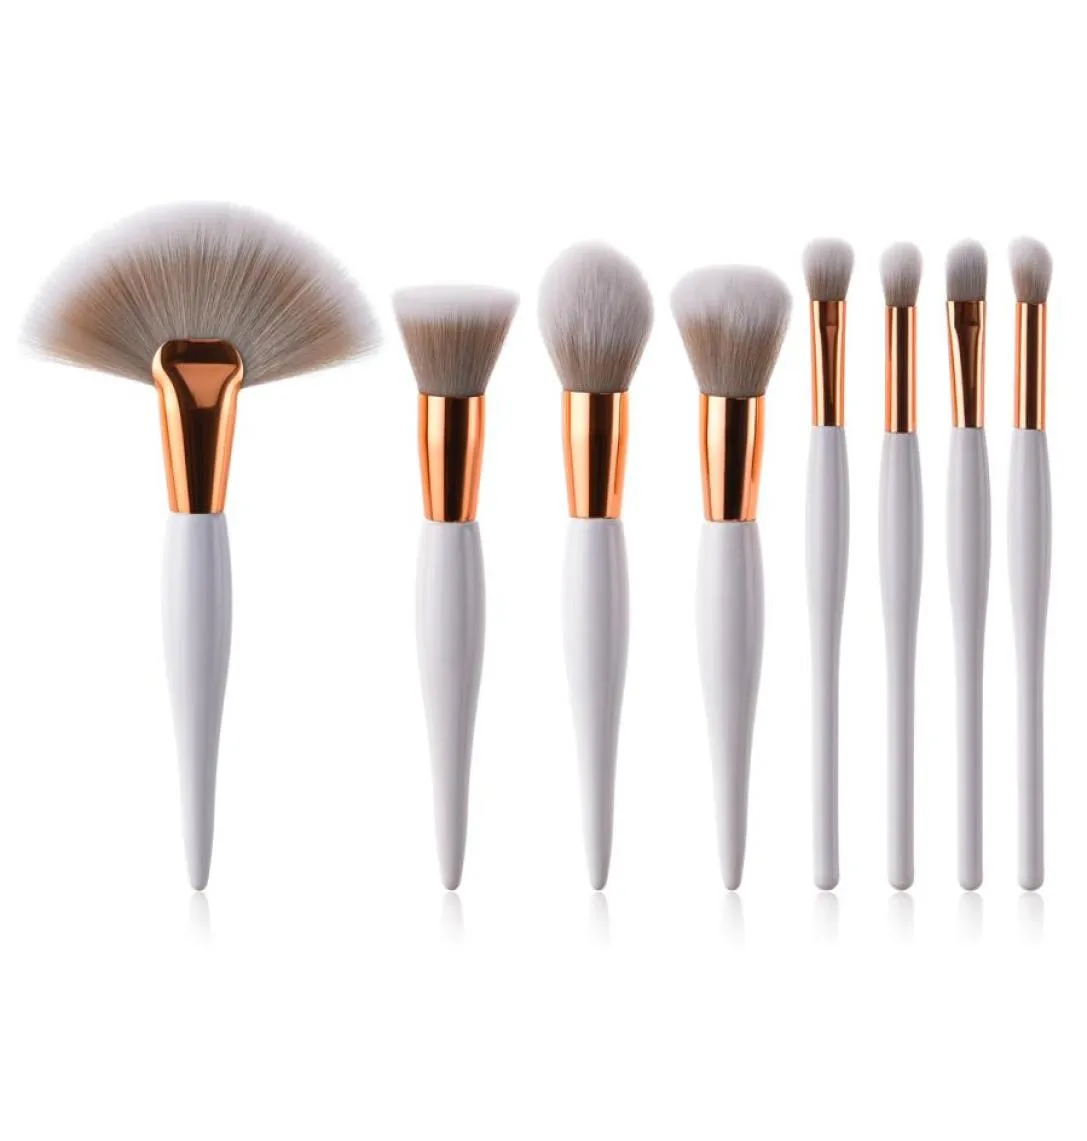 retail makeup brushes 4piece1set 8piece1 set A rich hair brush fan brush freight for gift and promotion9799289